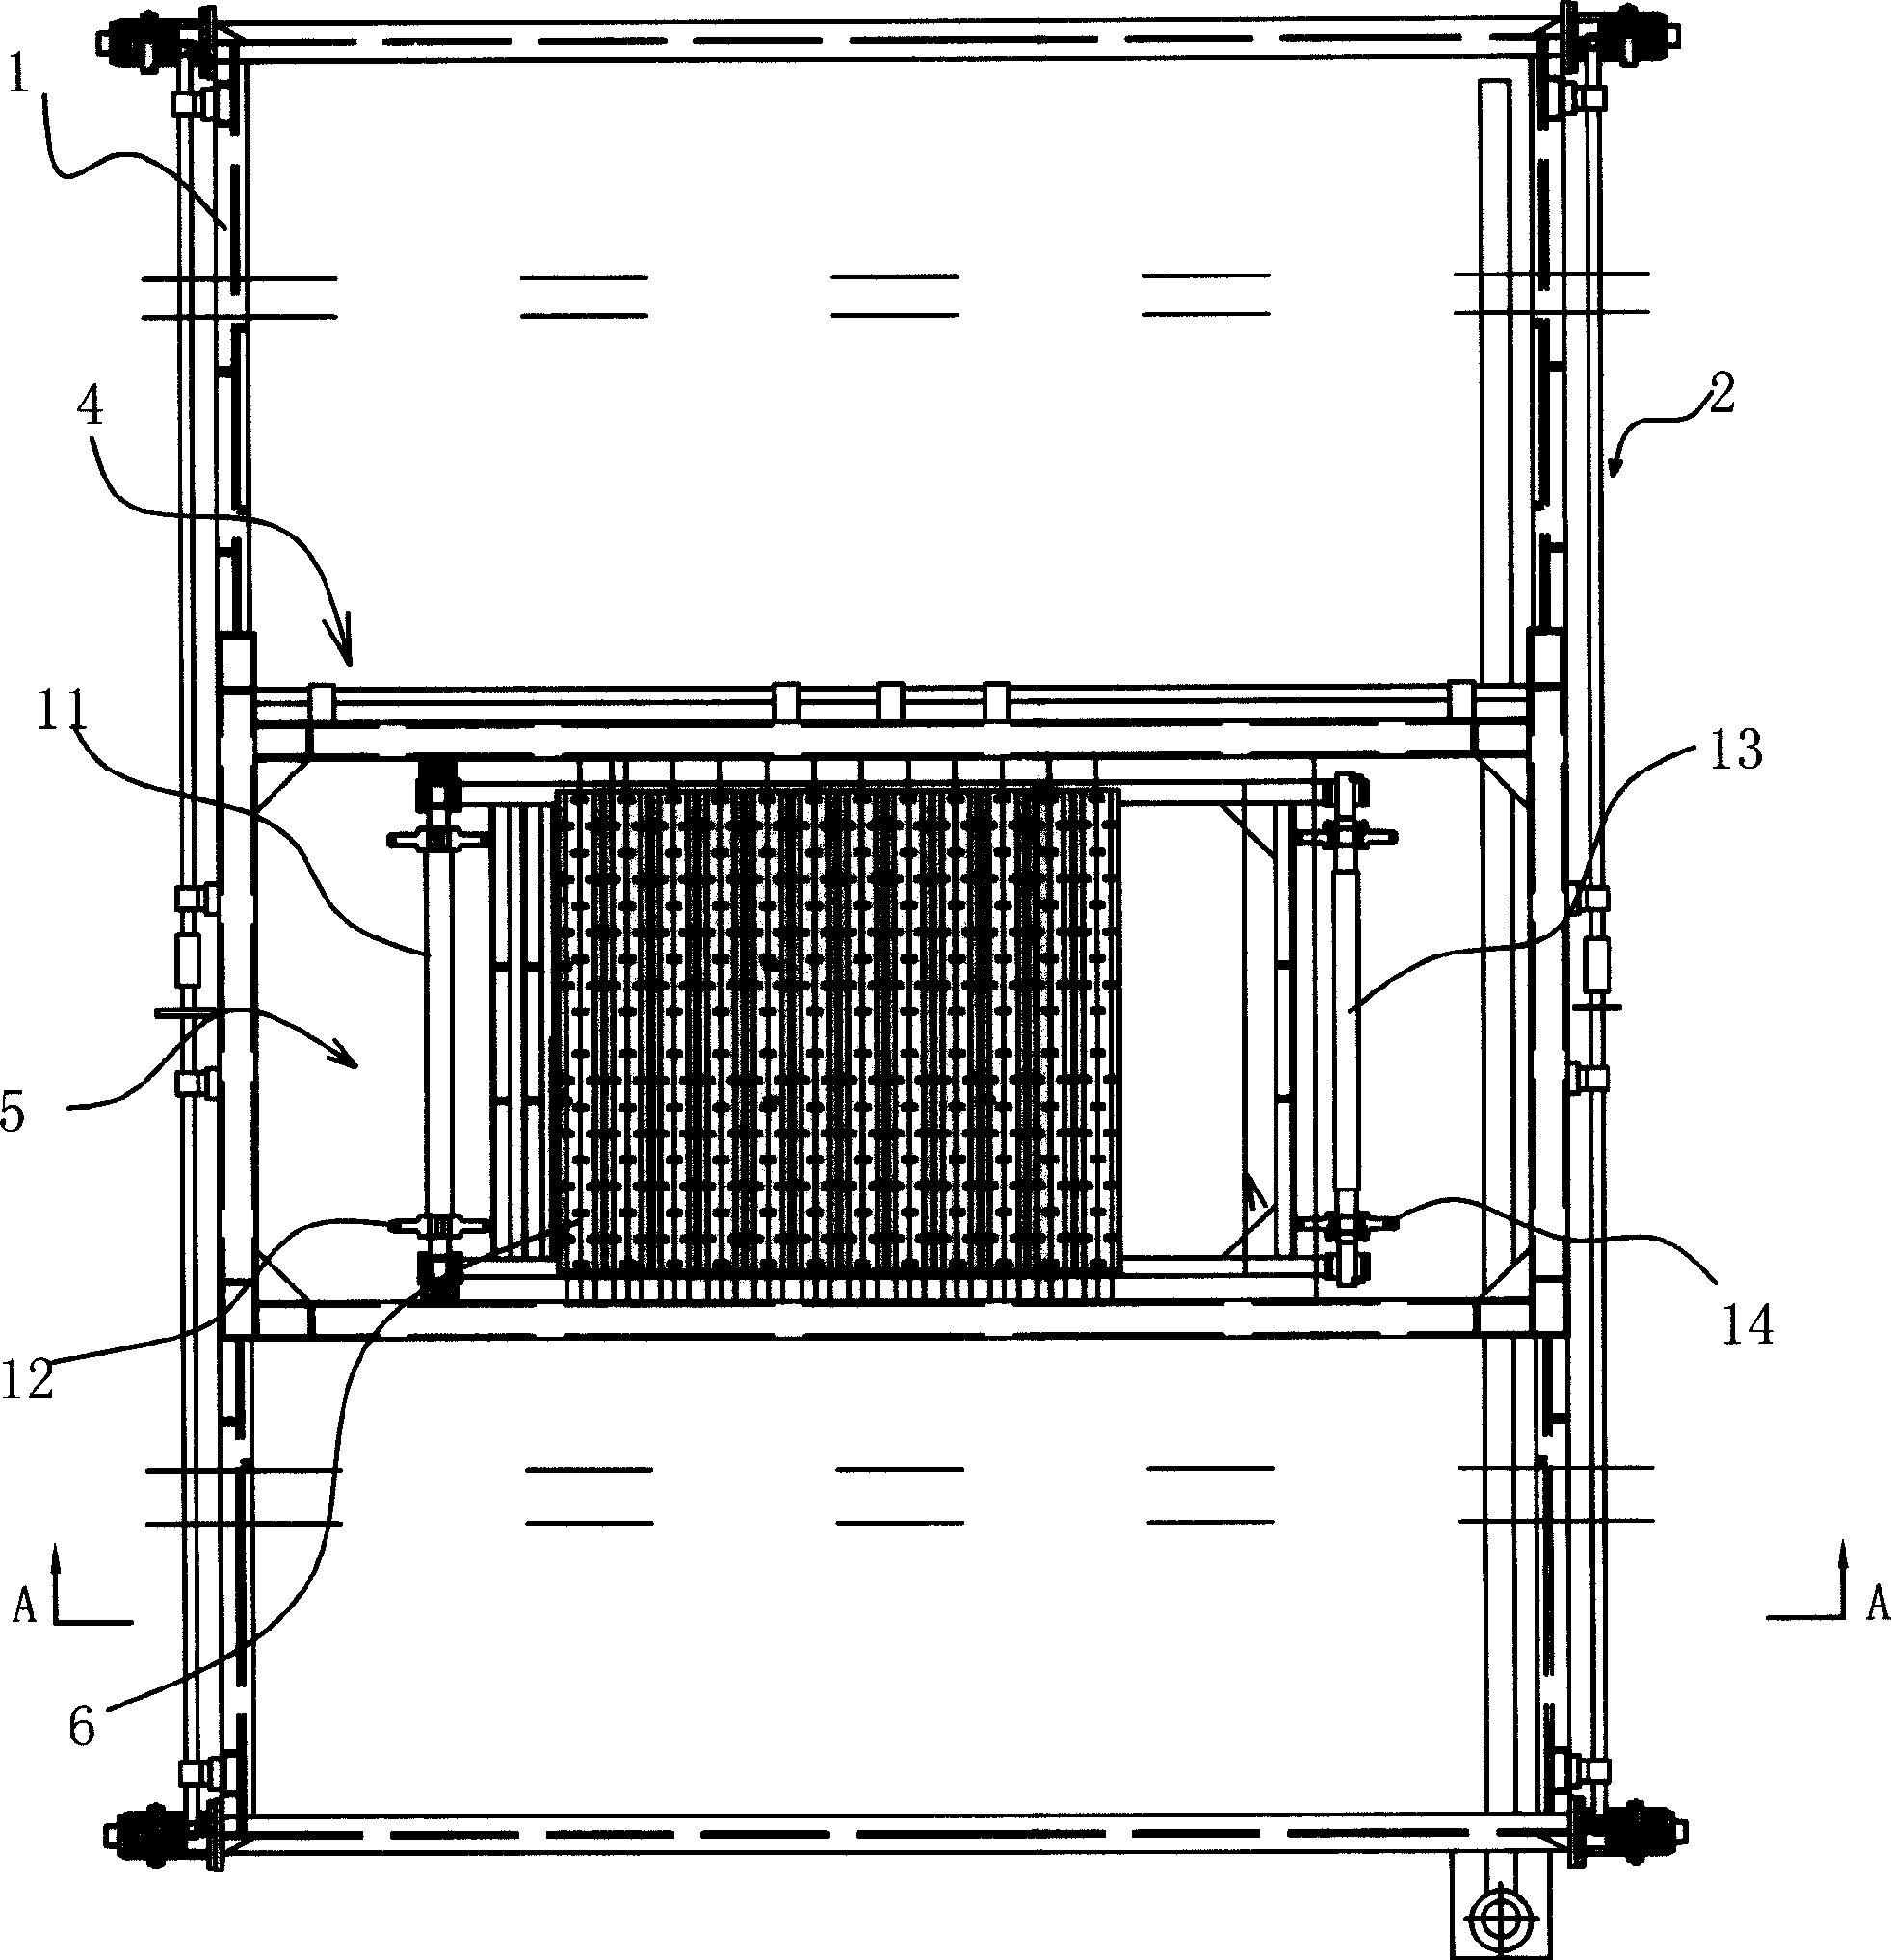 Aniamal and bird manure water treating system and treatment